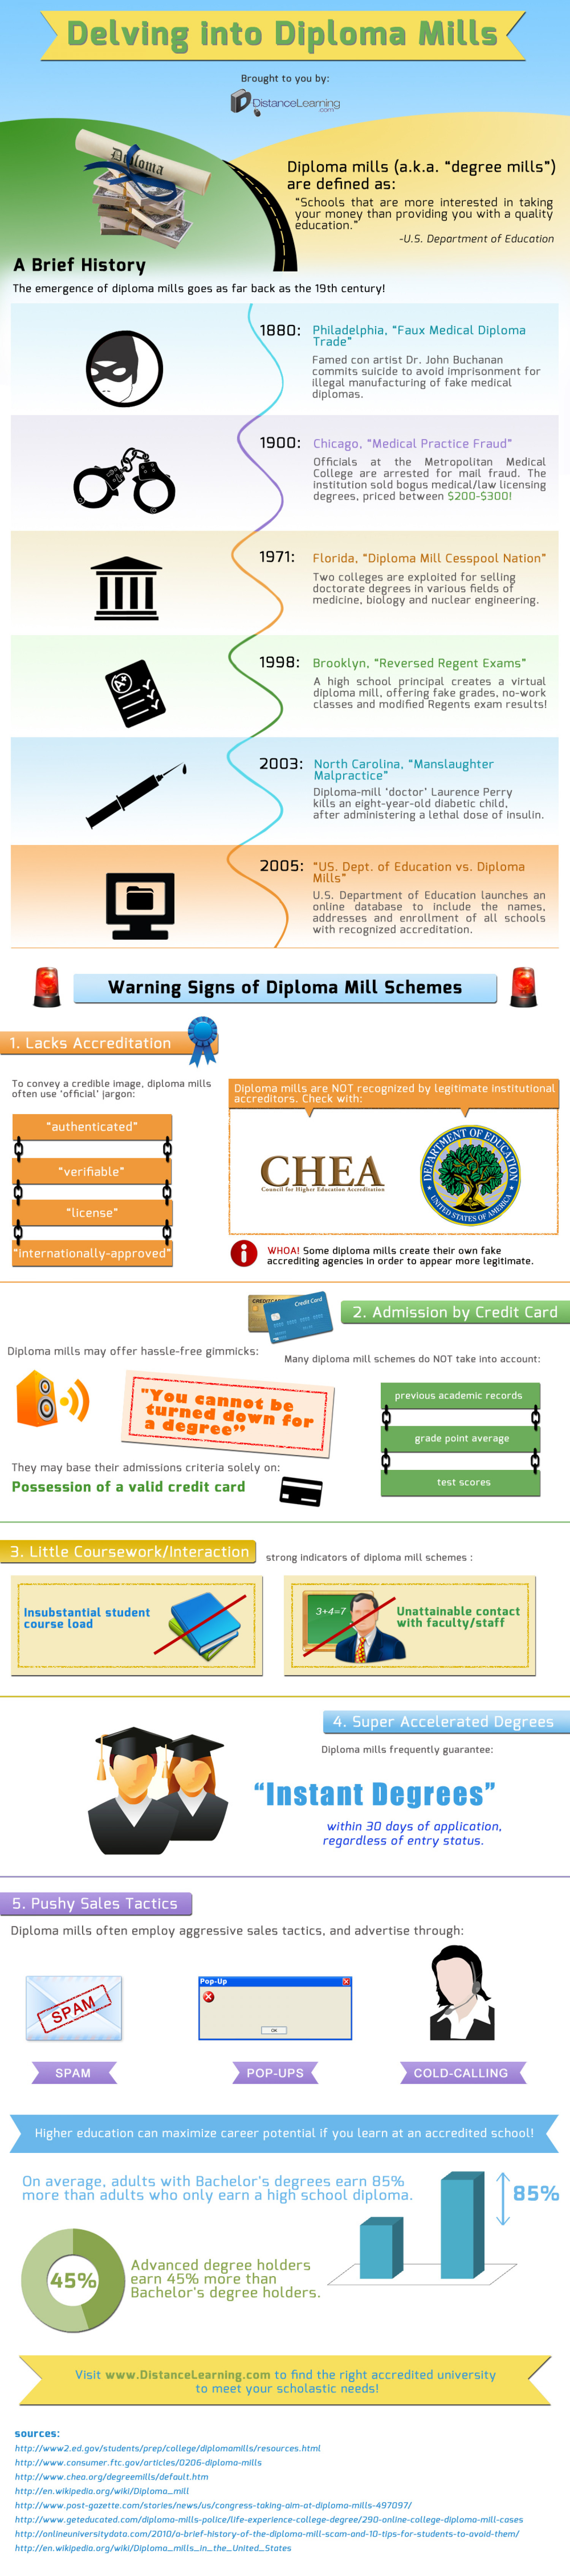 Delving into Diploma Mills Infographic